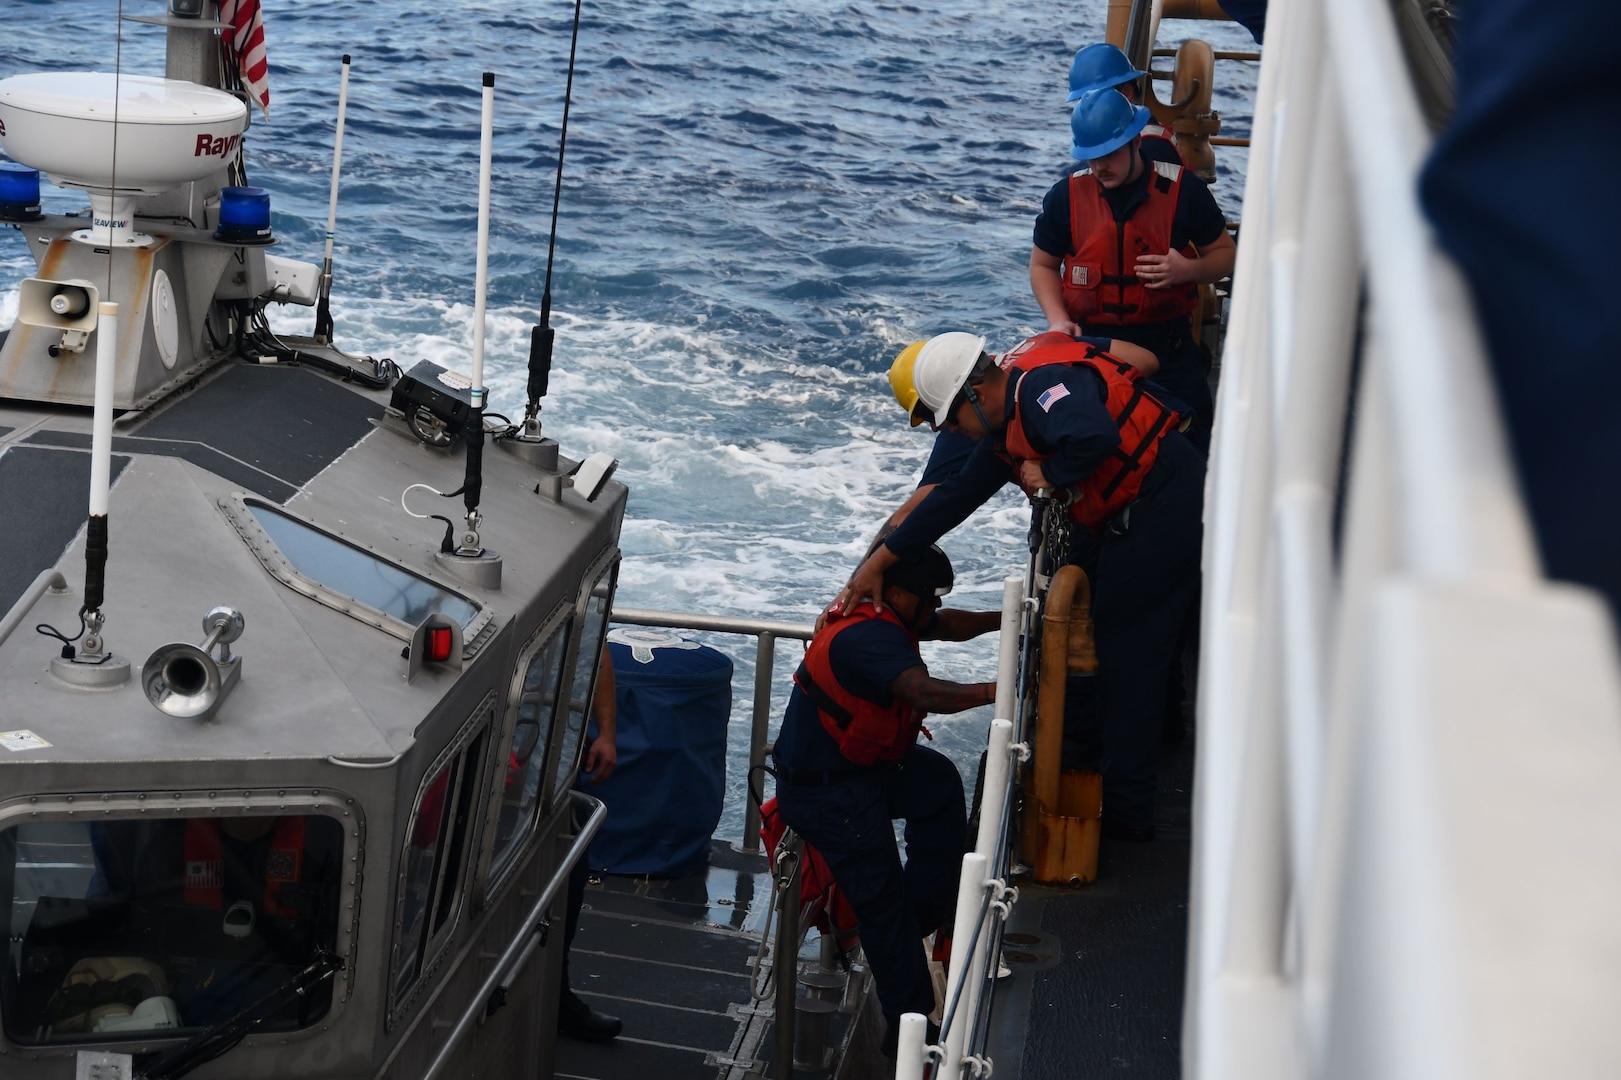 On February 13th, 2023 U.S. Coast Guard Cutter Oliver Berry, a 154-foot Fast Response Cutter was tasked with assisting the vessel Eden Bound, a 58-foot long pleasure craft adrift 230 nautical miles Southwest of Oahu.